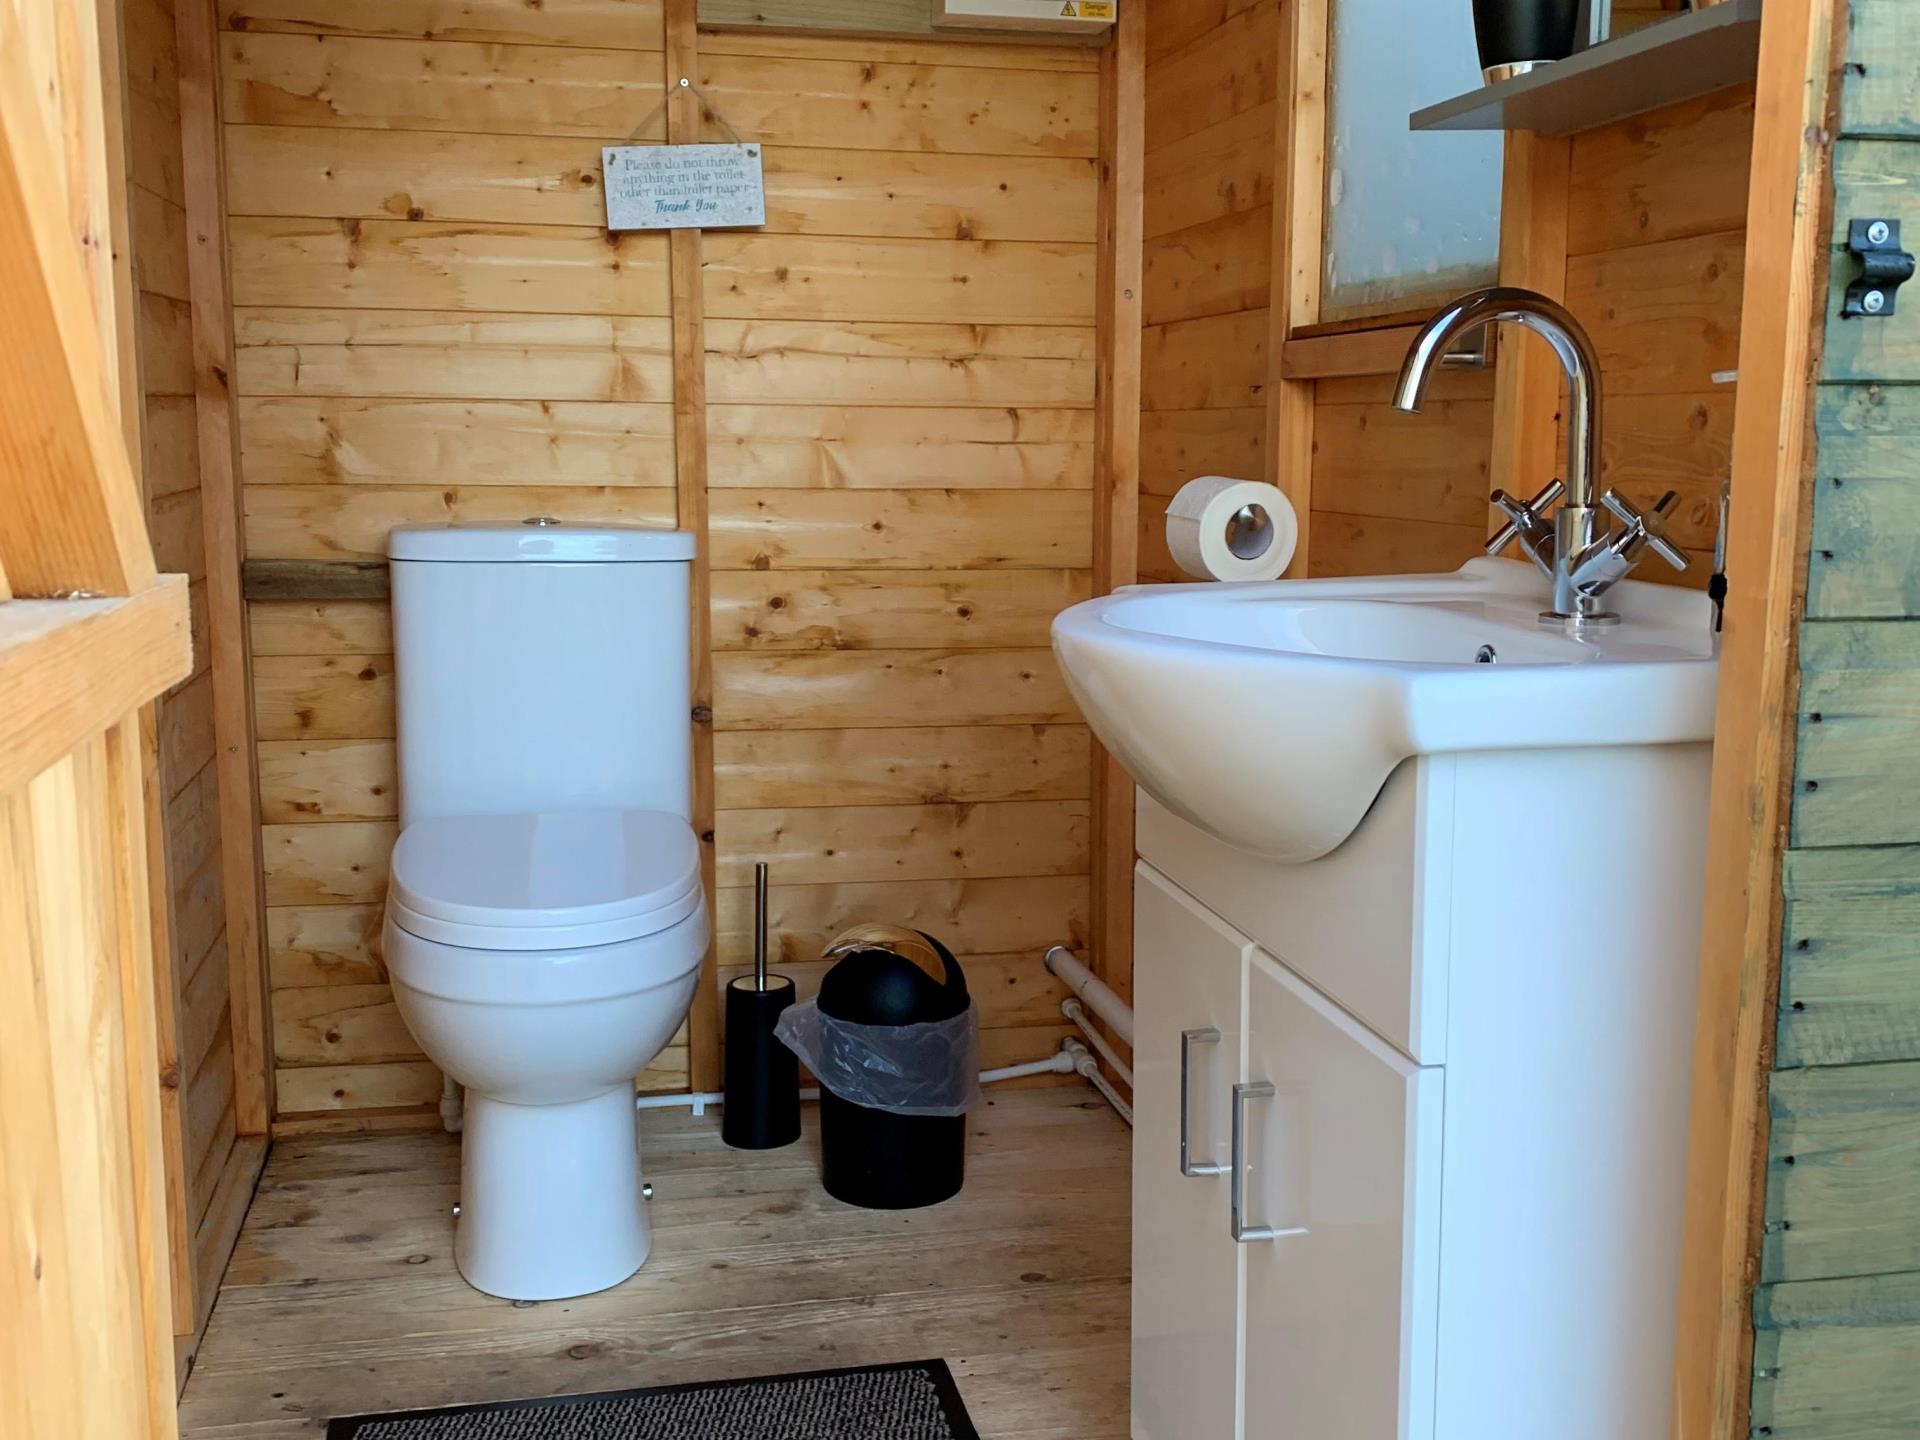 Your own flushing toilet and basin with hot water